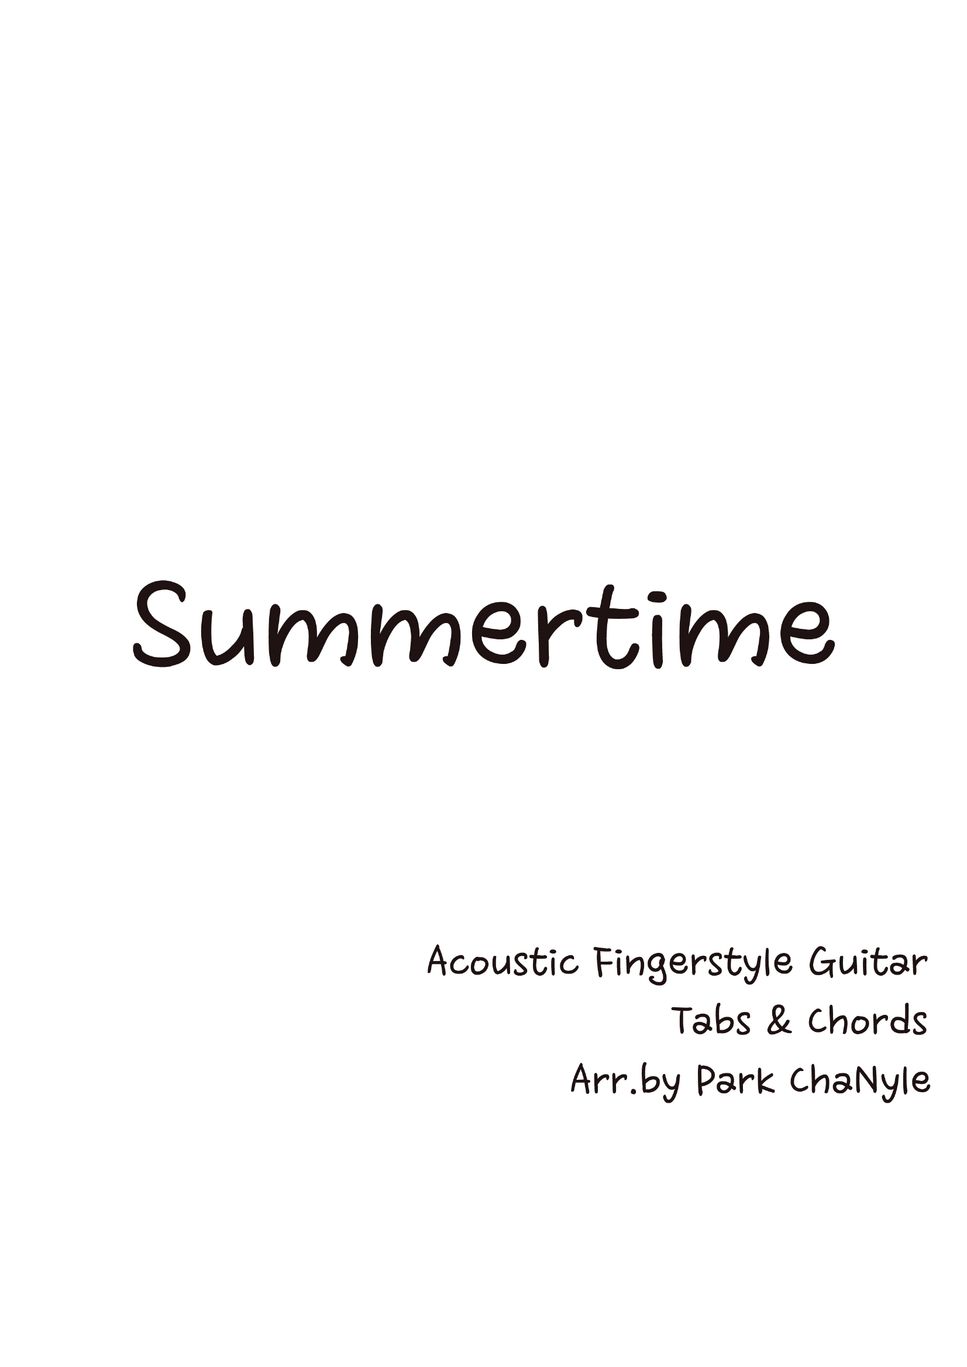 George Gershwin - Summertime (Jazz Fingerstyle Guitar) by Park ChaNyle